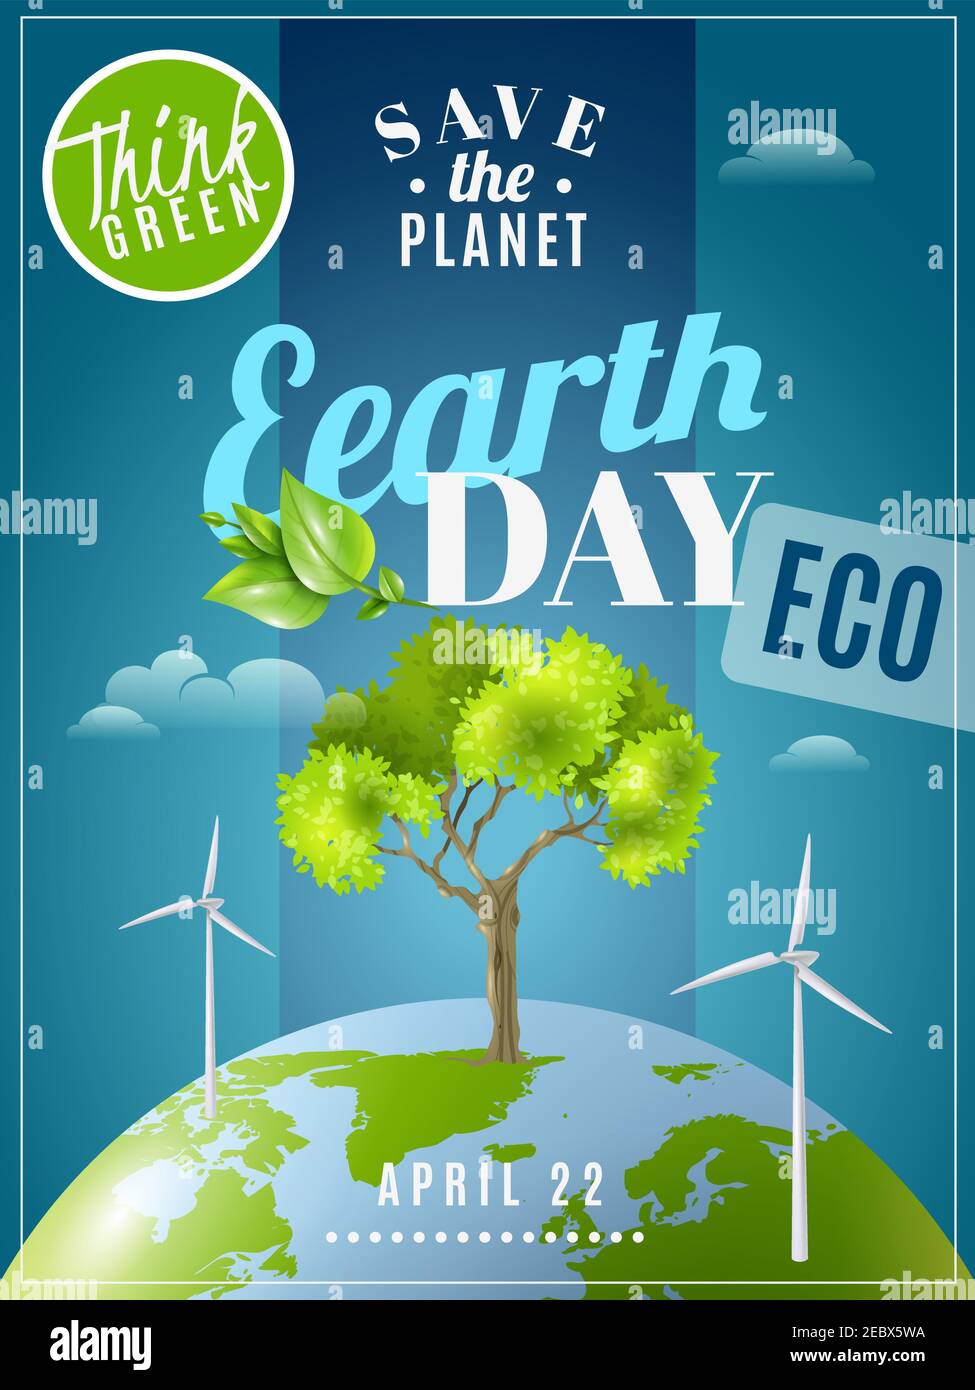 Save planet earth day announcement environmental awareness advertisement eco poster with green energy sources colorful vector illustration Stock Vector